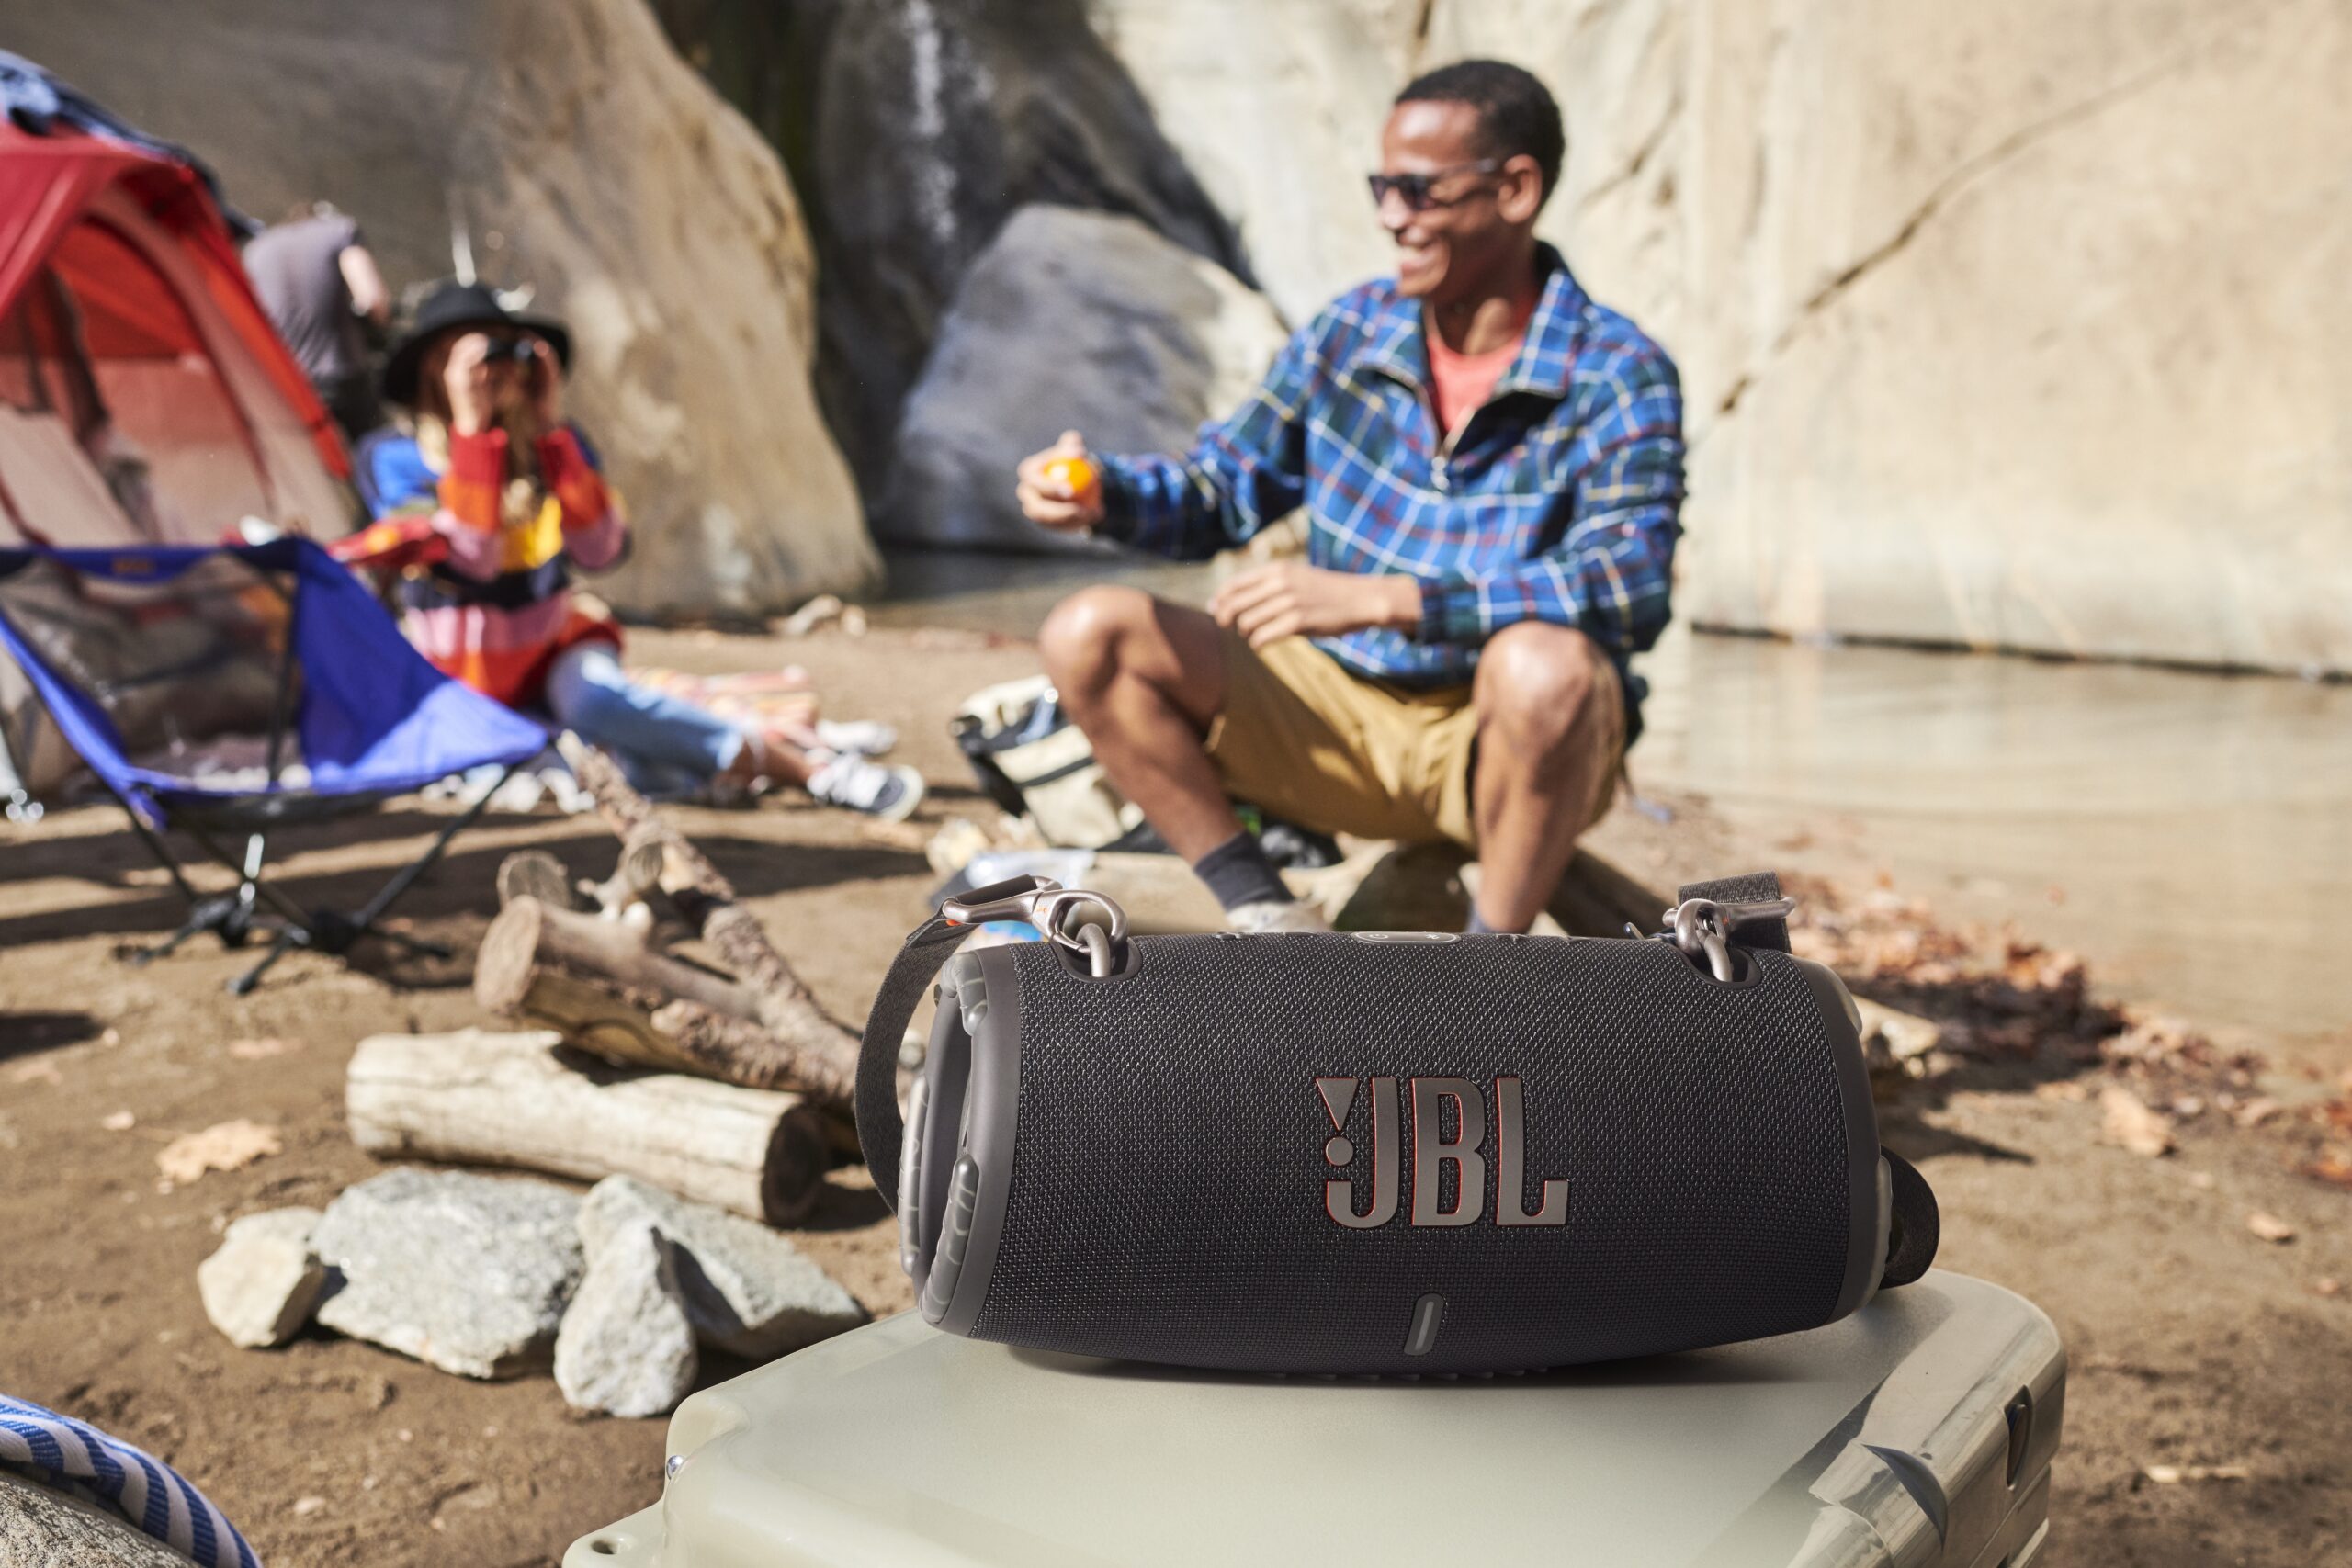 Man and woman at campground, JBL speaker in forgeround